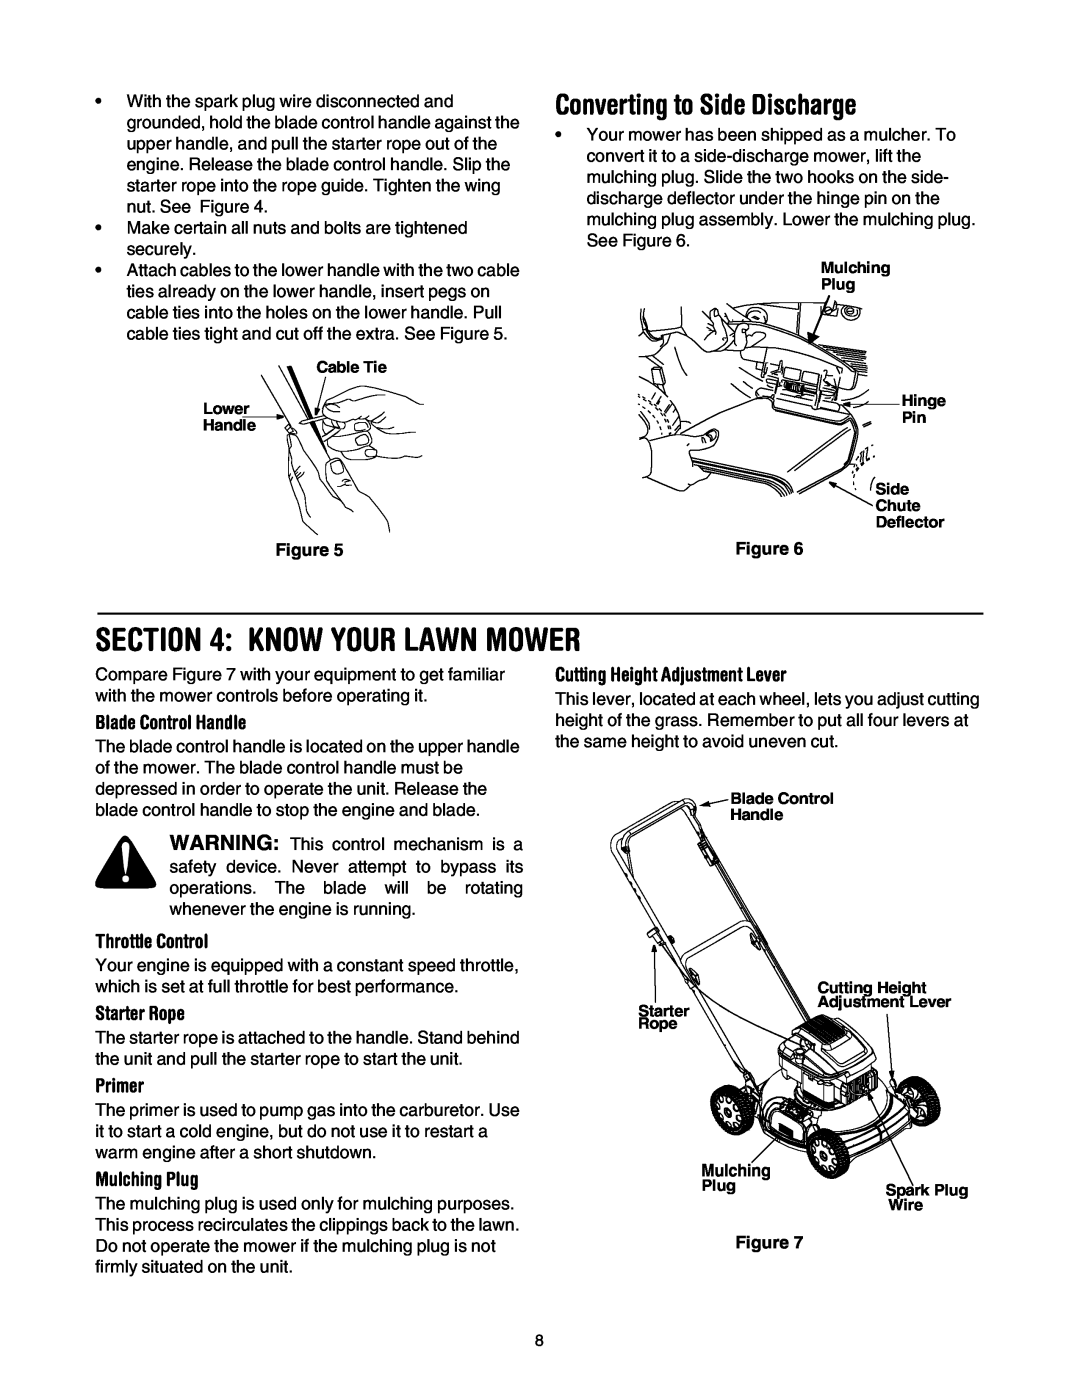 Troy-Bilt TRU CUT 100 Know Your Lawn Mower, Converting to Side Discharge, Blade Control Handle, Throttle Control, Primer 